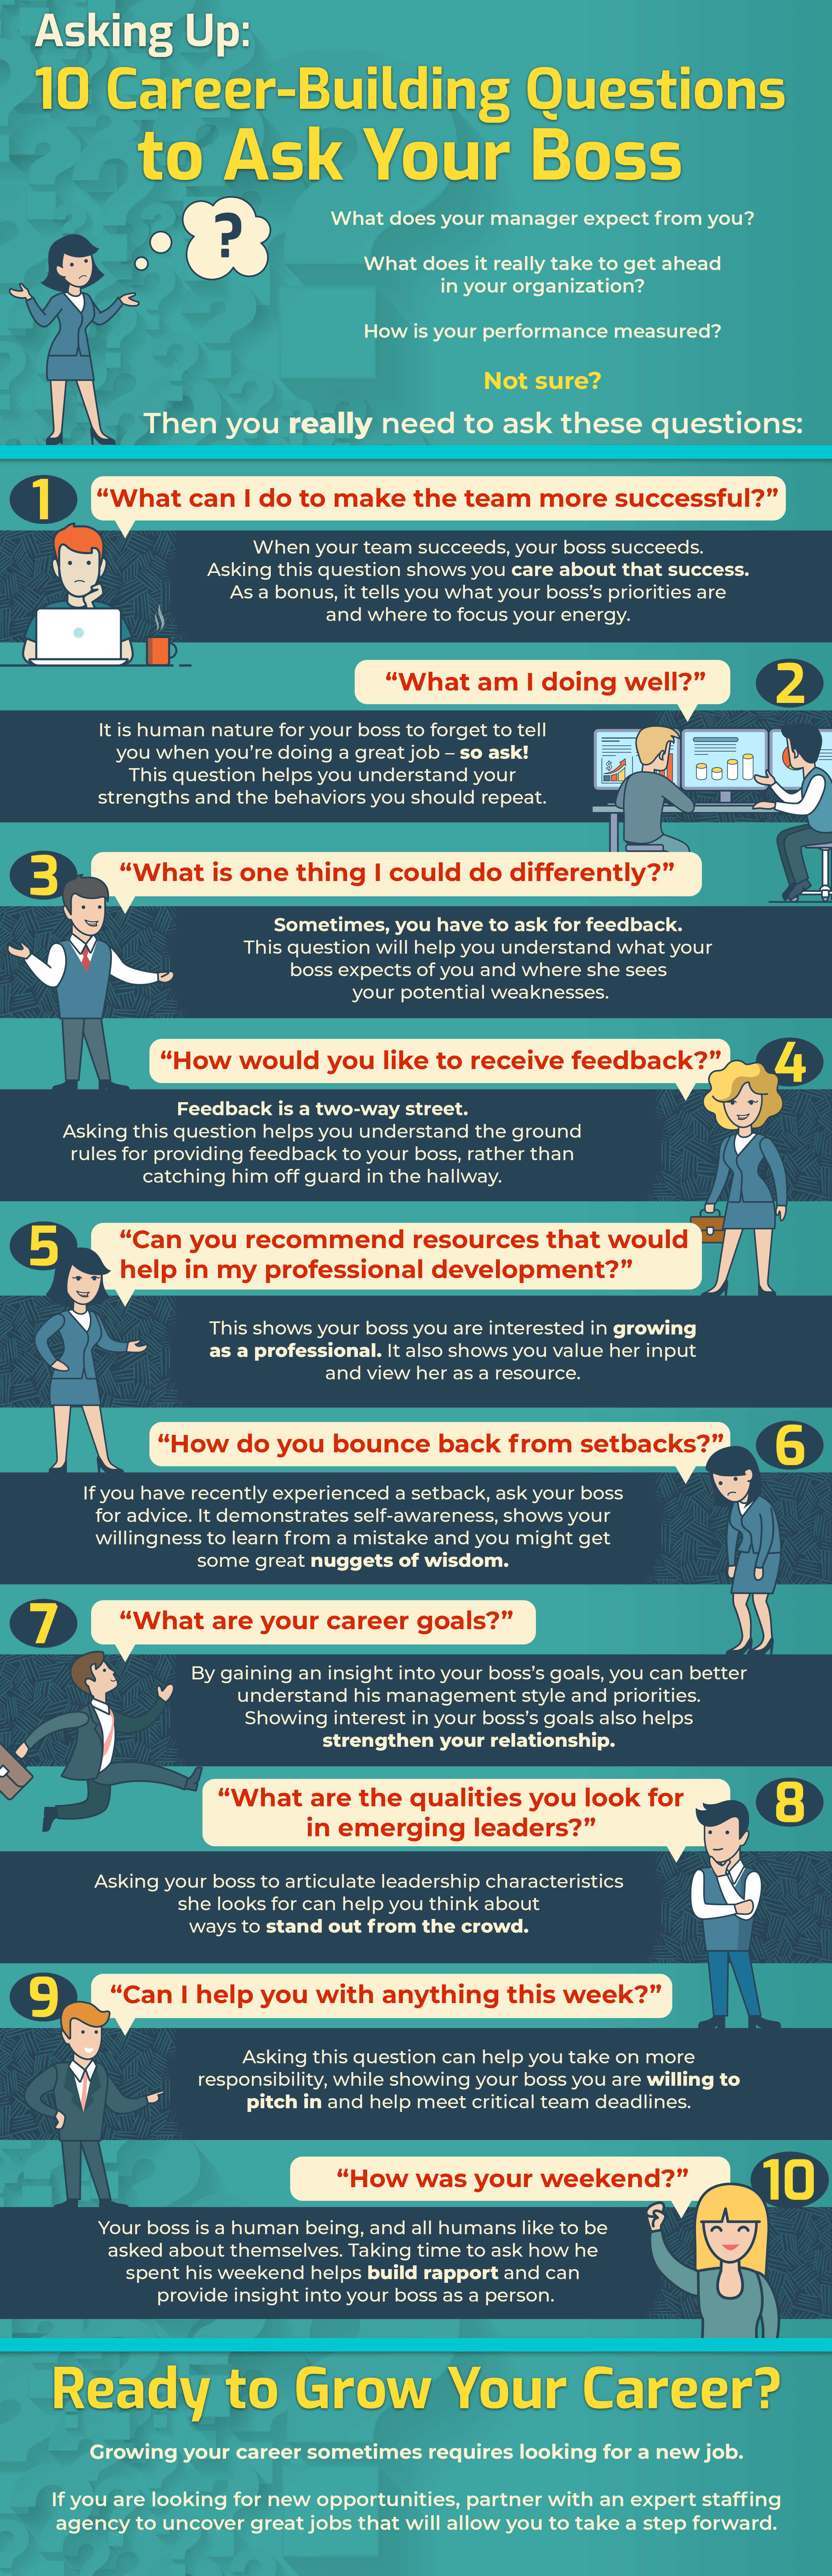 Asking Up: 10 Career-Building Questions to Ask Your Boss
            